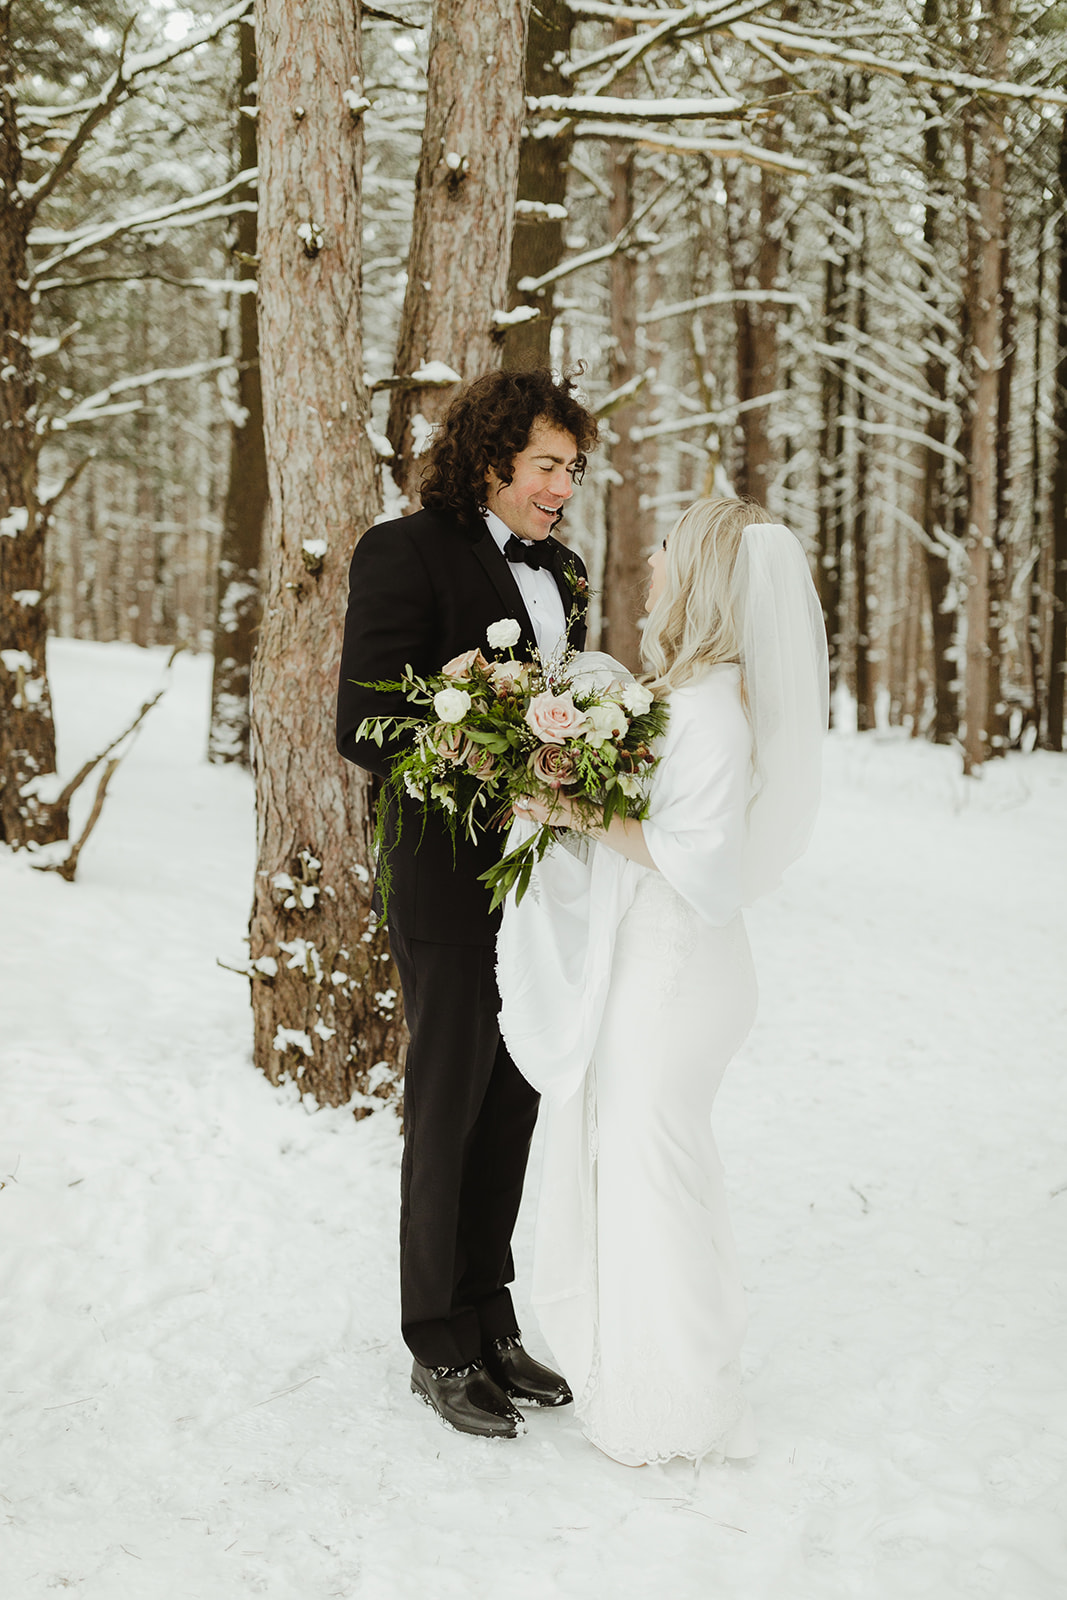 A bride and groom smiling in the snowy woods after their wedding